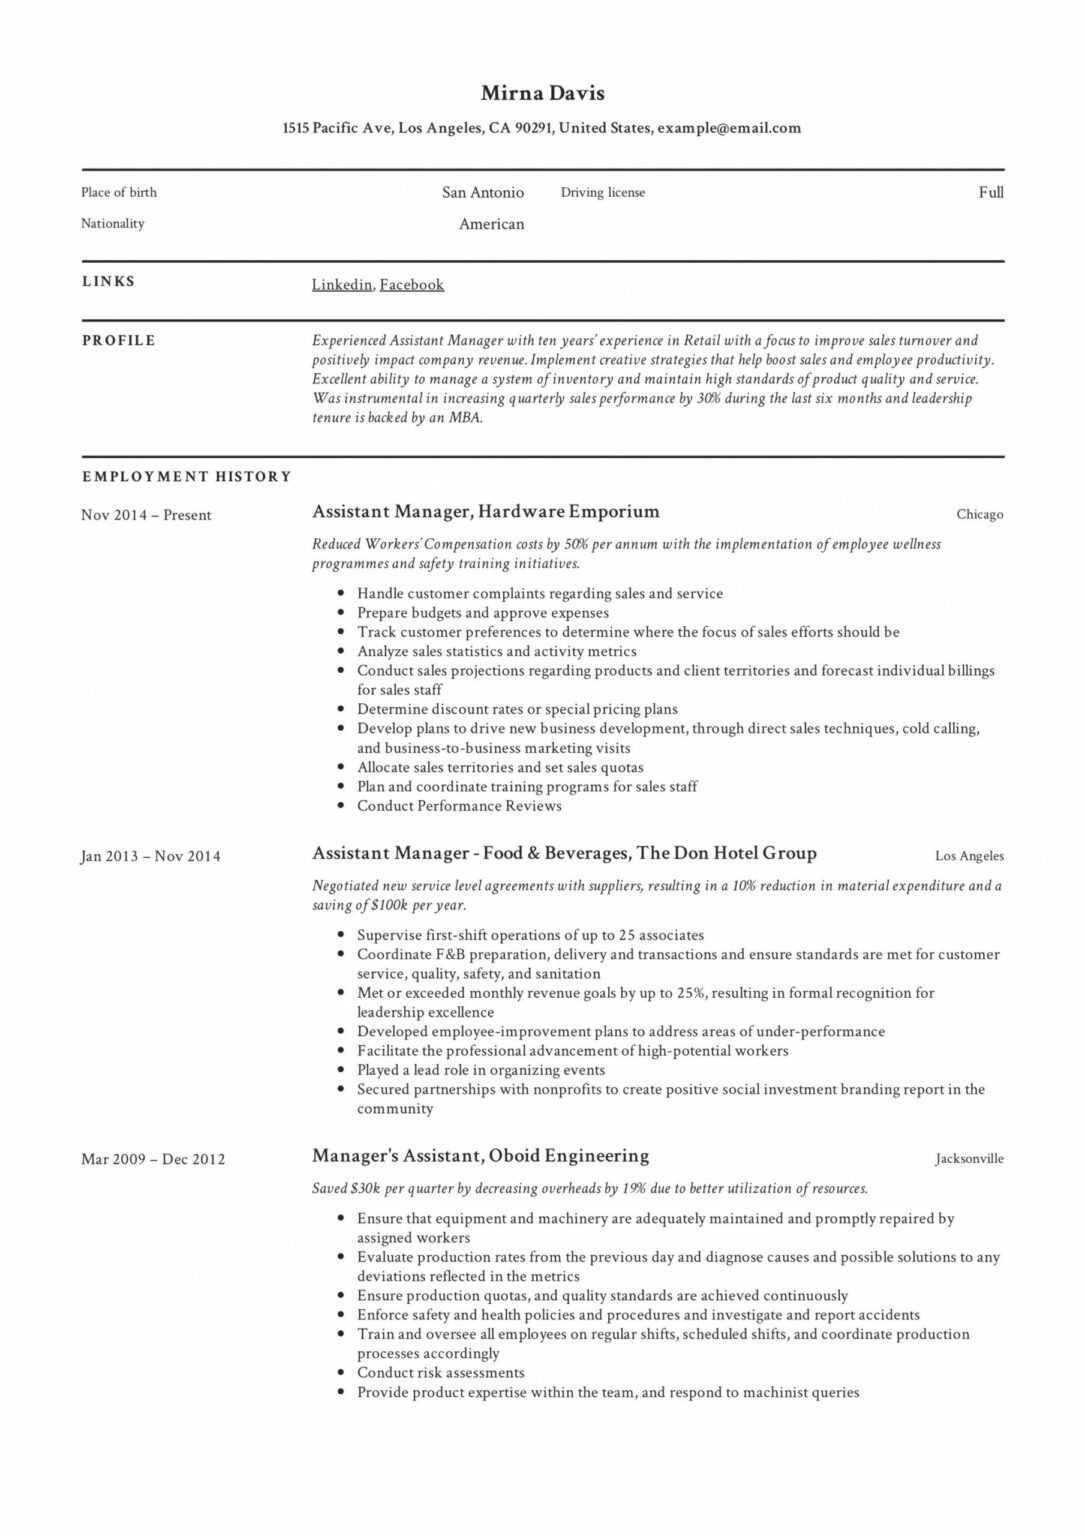 another word for assist resume